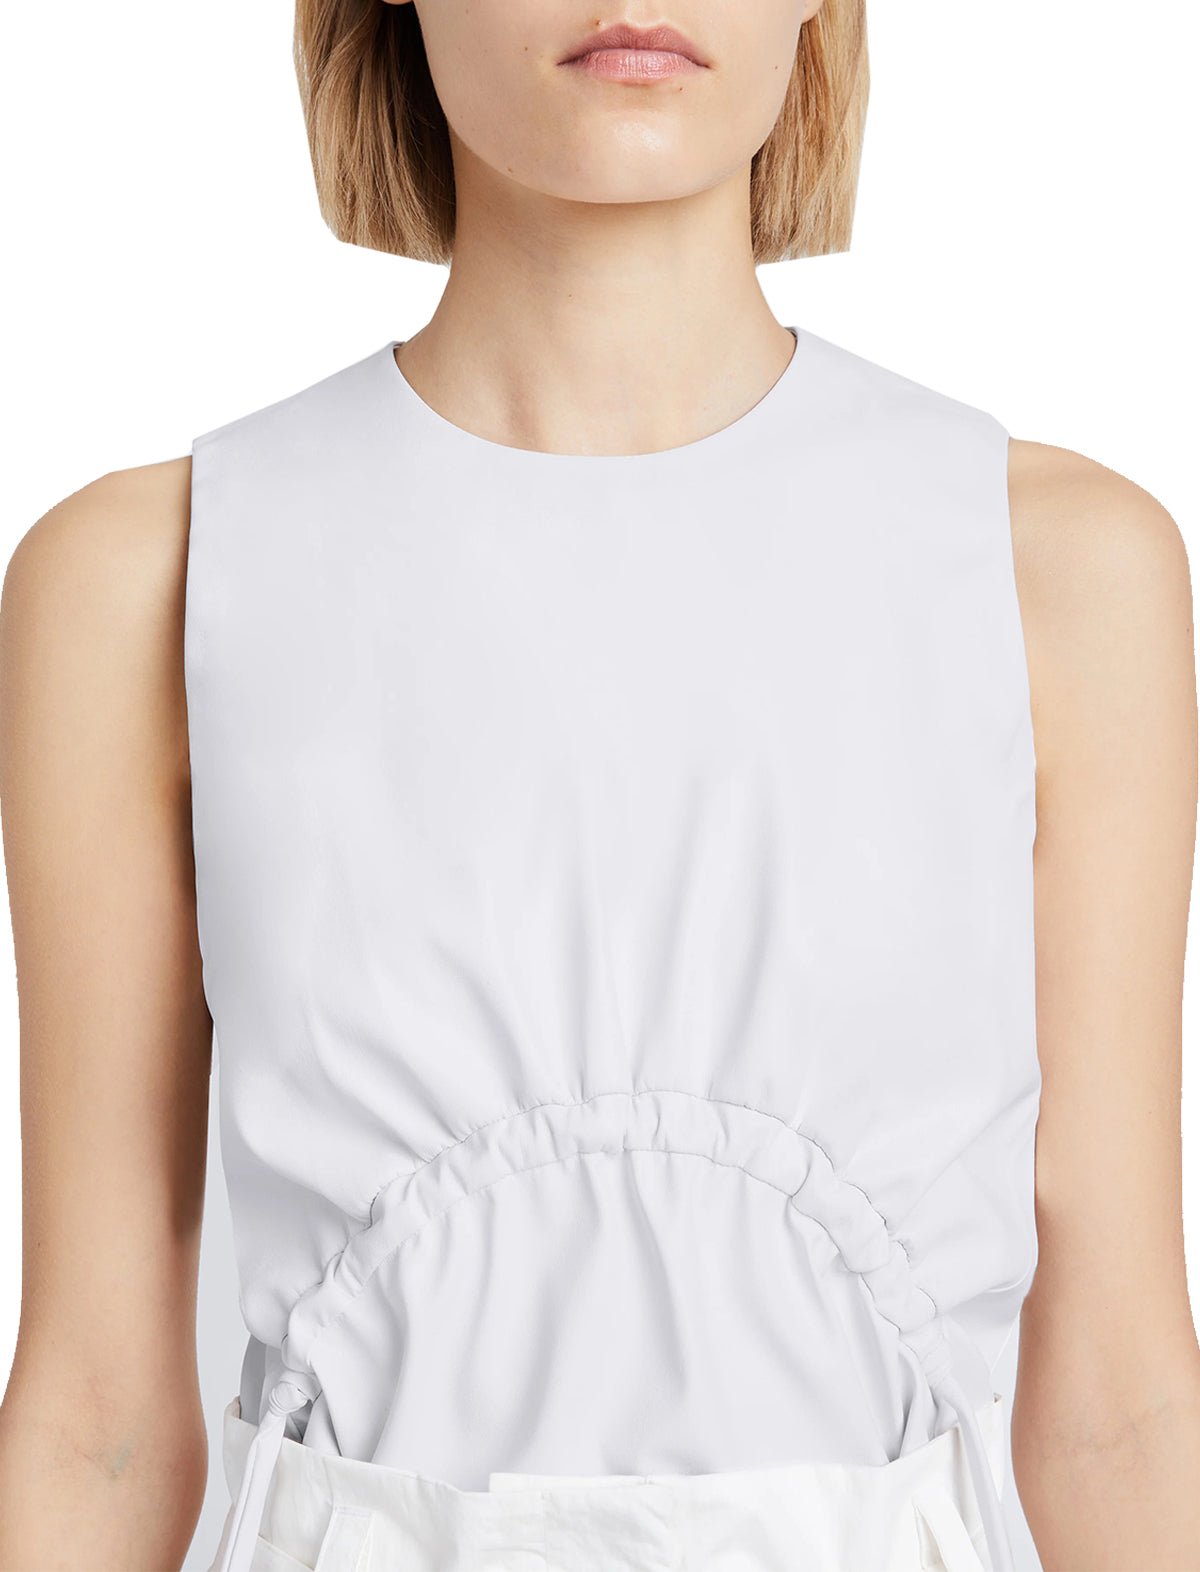 PROENZA SCHOULER WHITE LABEL Faux Leather Drawstring Top in Off White